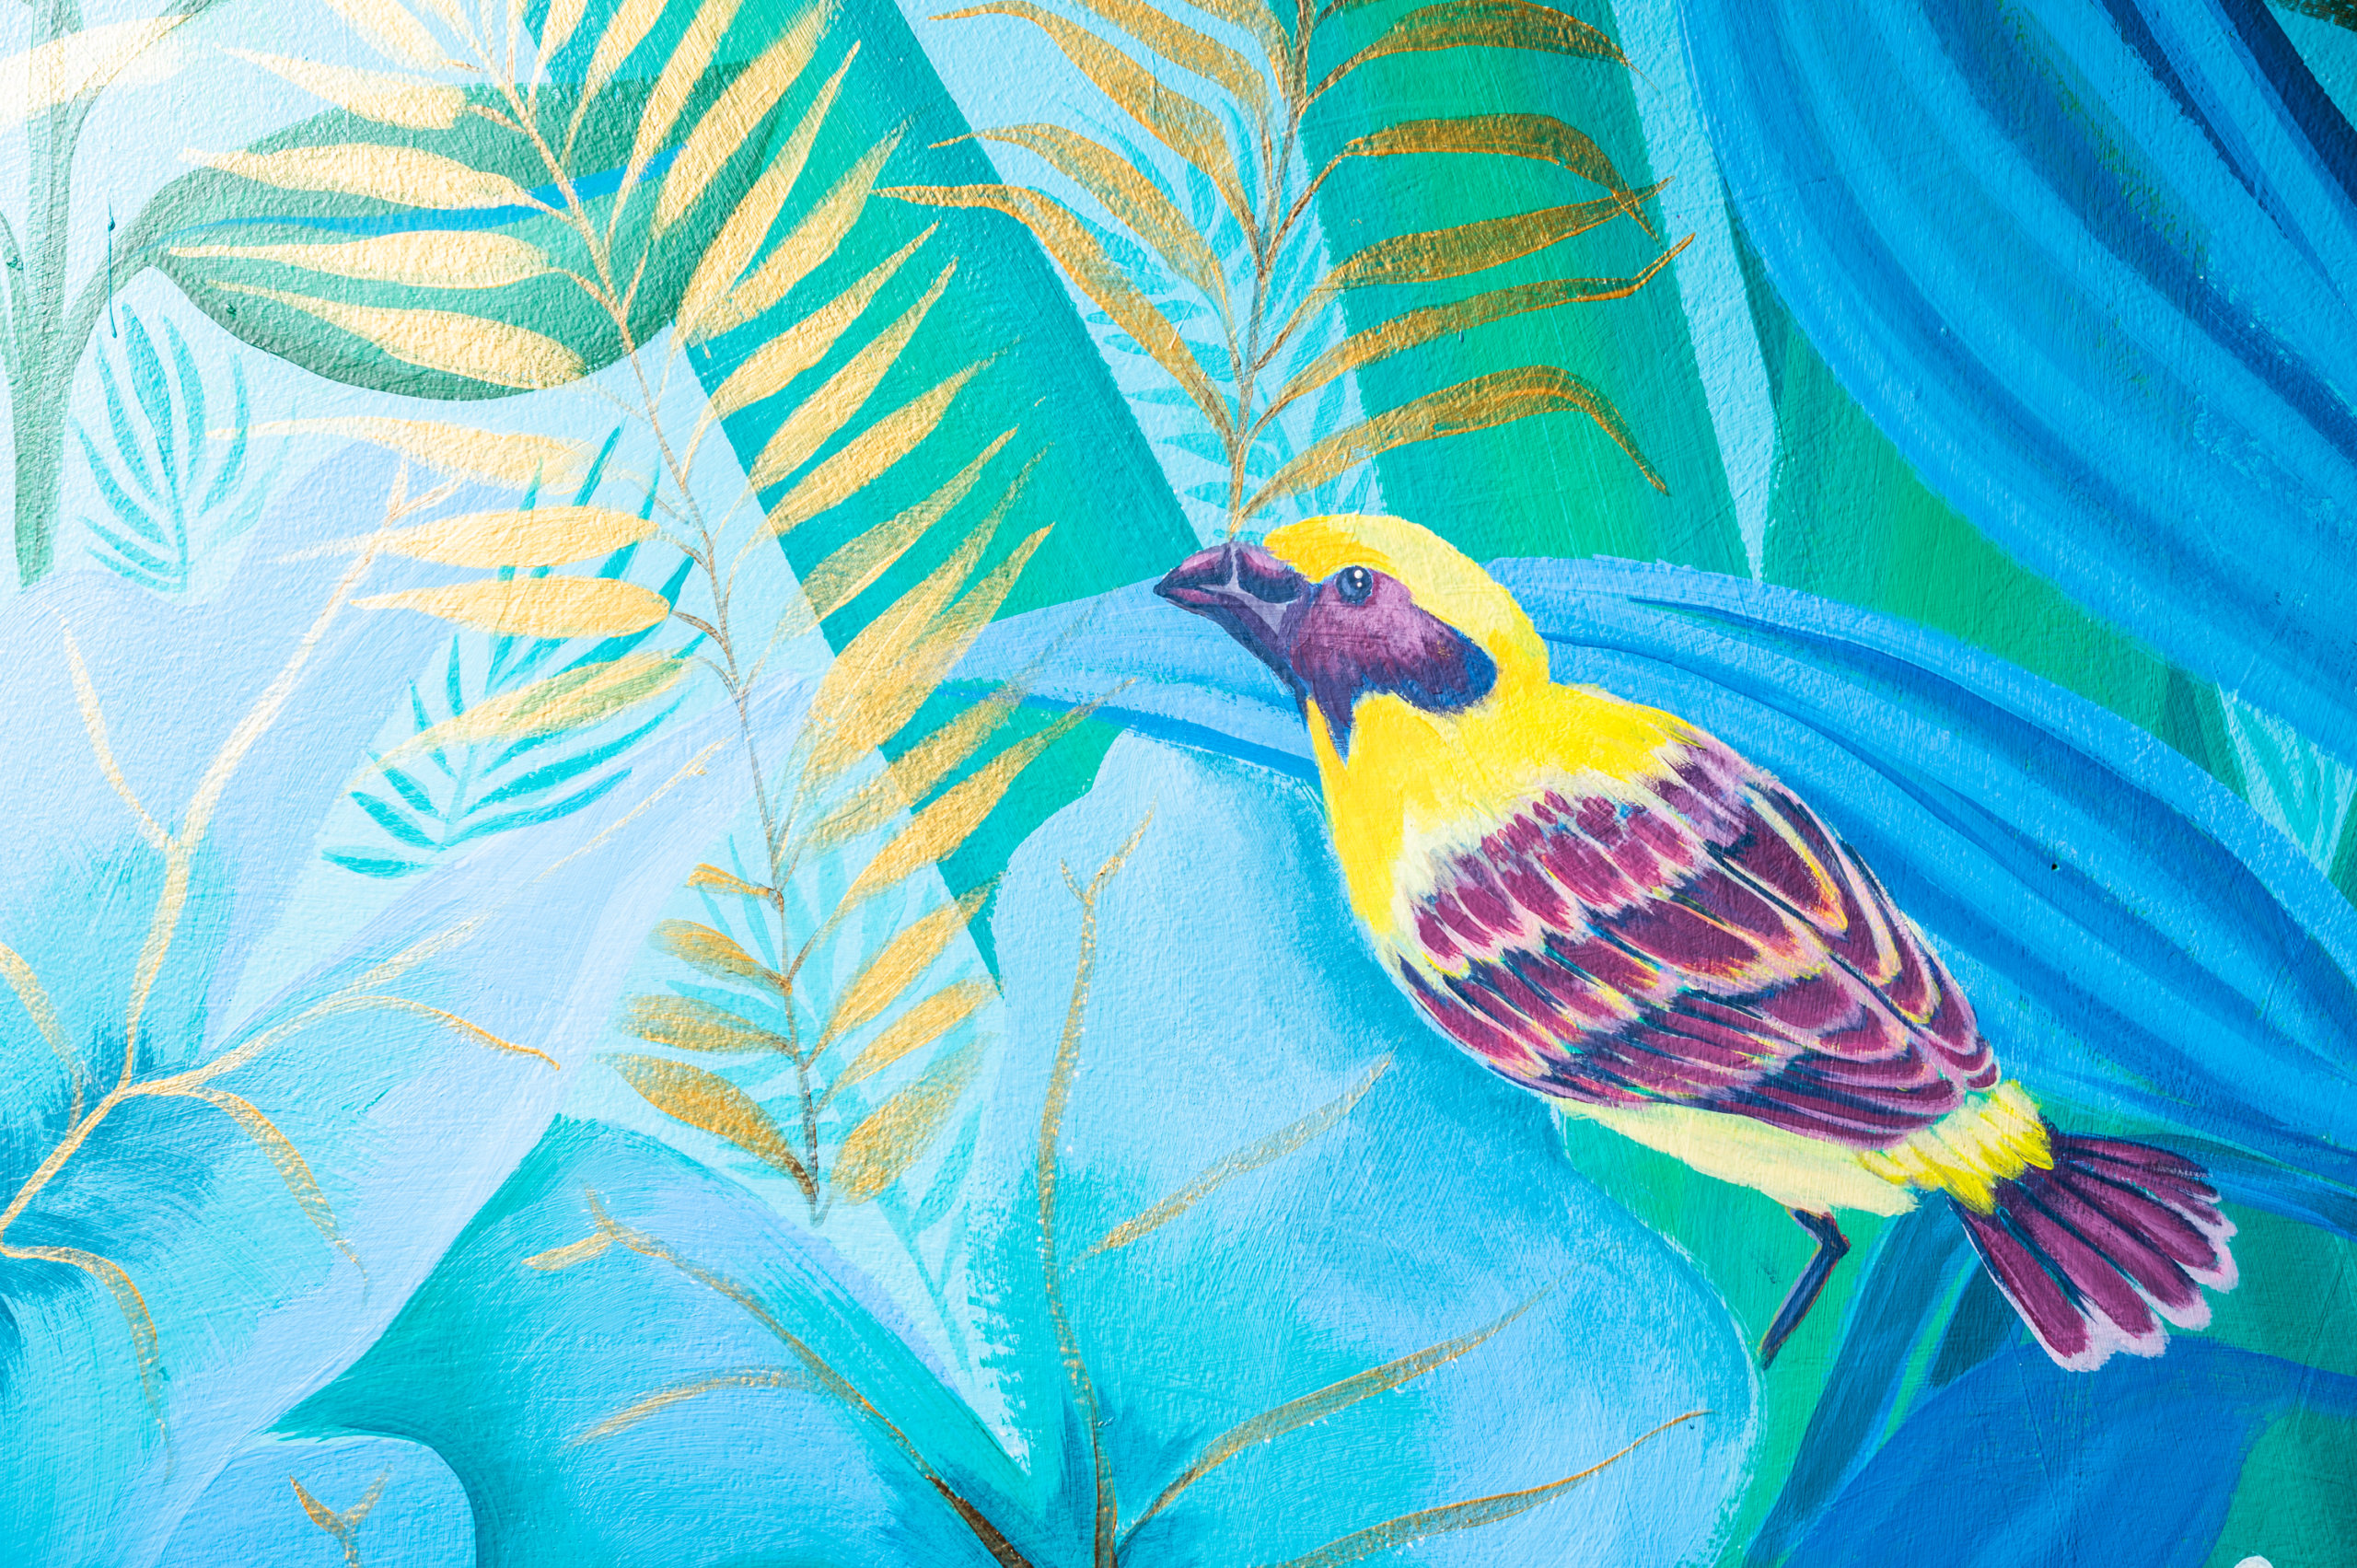 Details of a yellow and purple bird